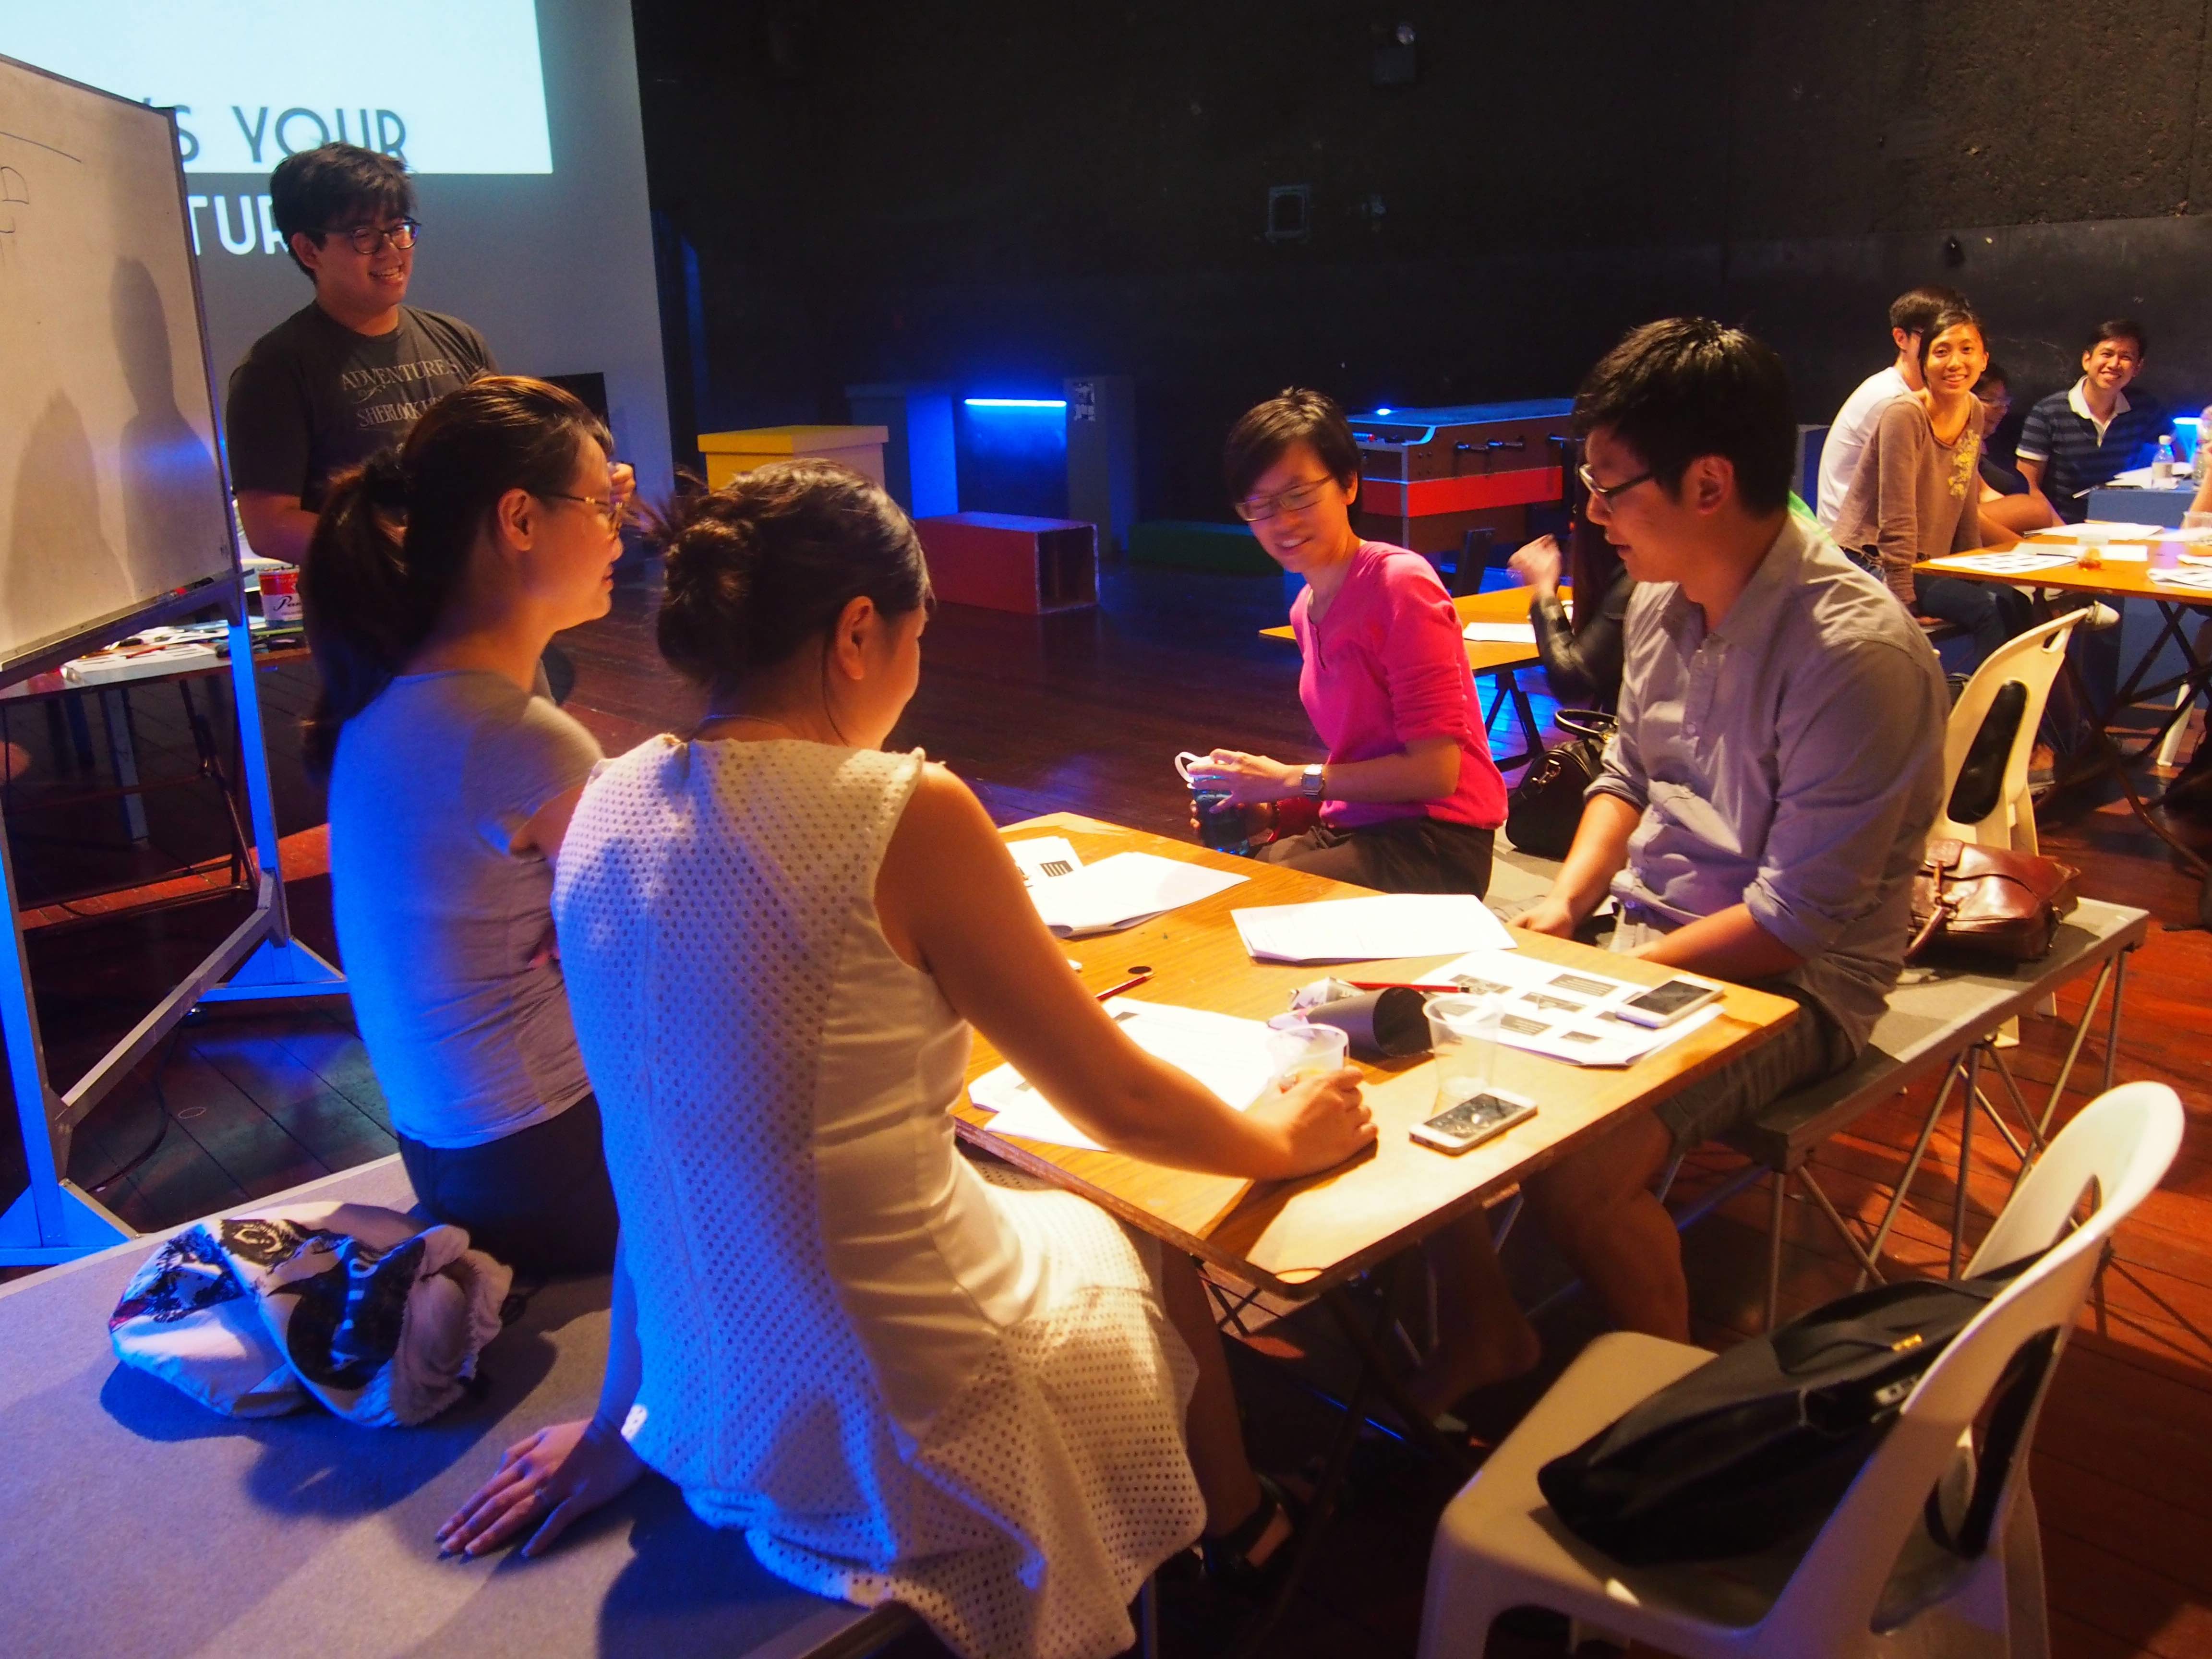 Photograph of participants at a table doing some activity as the trainer observes.